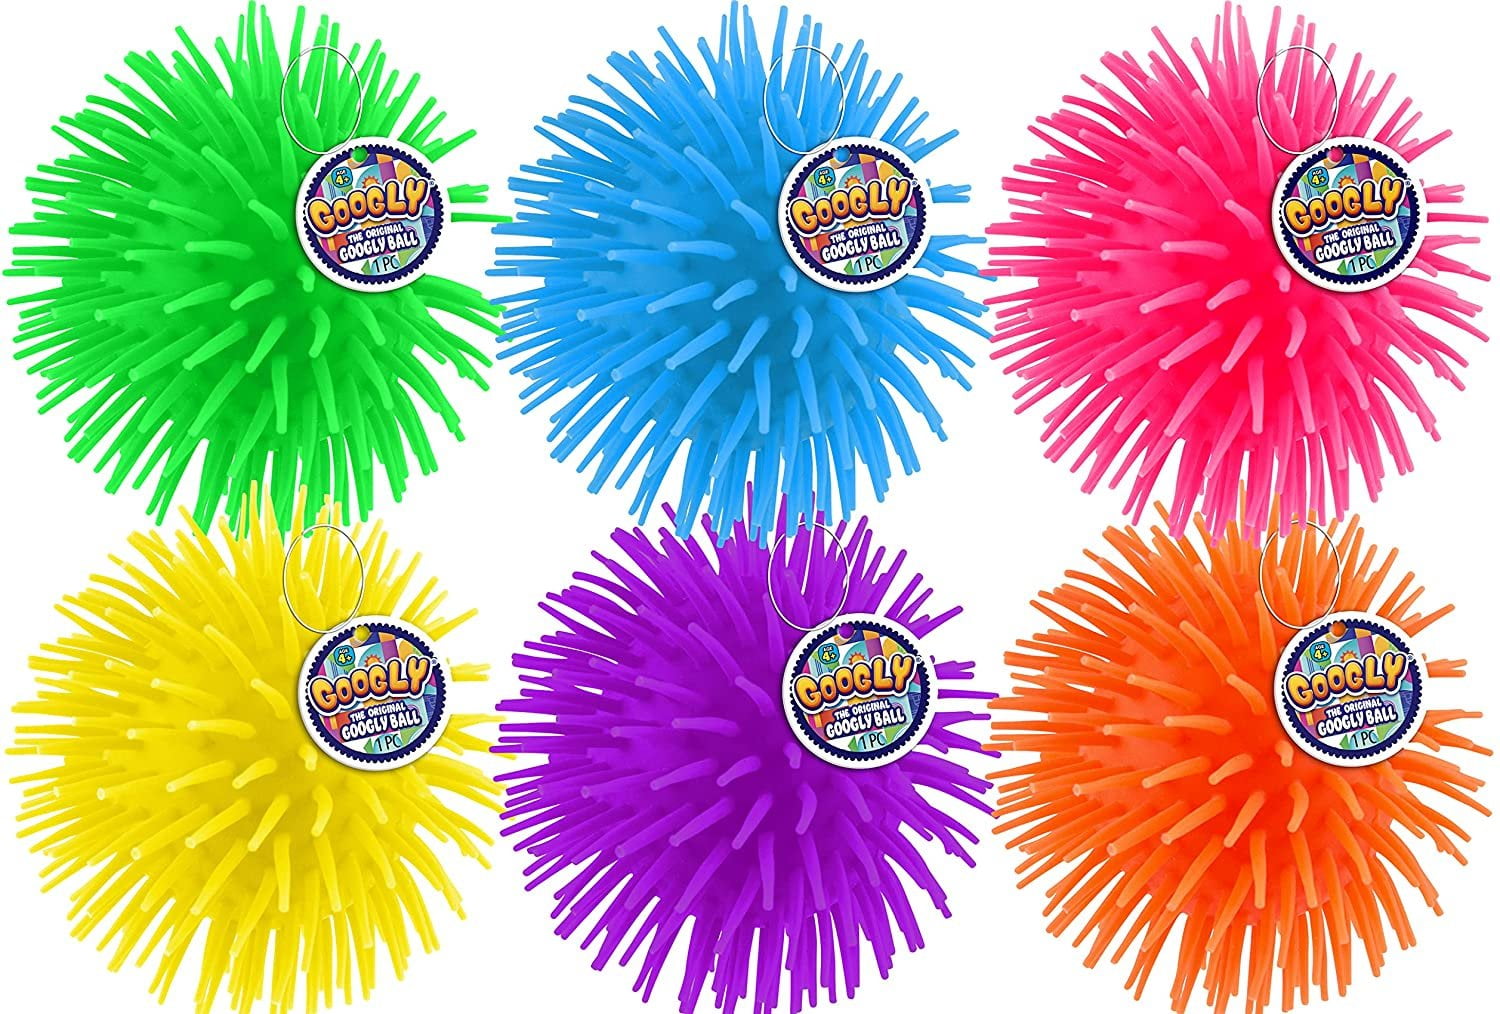 Buy Googly Rubber Stretchy Rubber Spike Ball 6 Balls Assorted Soft Squishy Ball And Stretchable